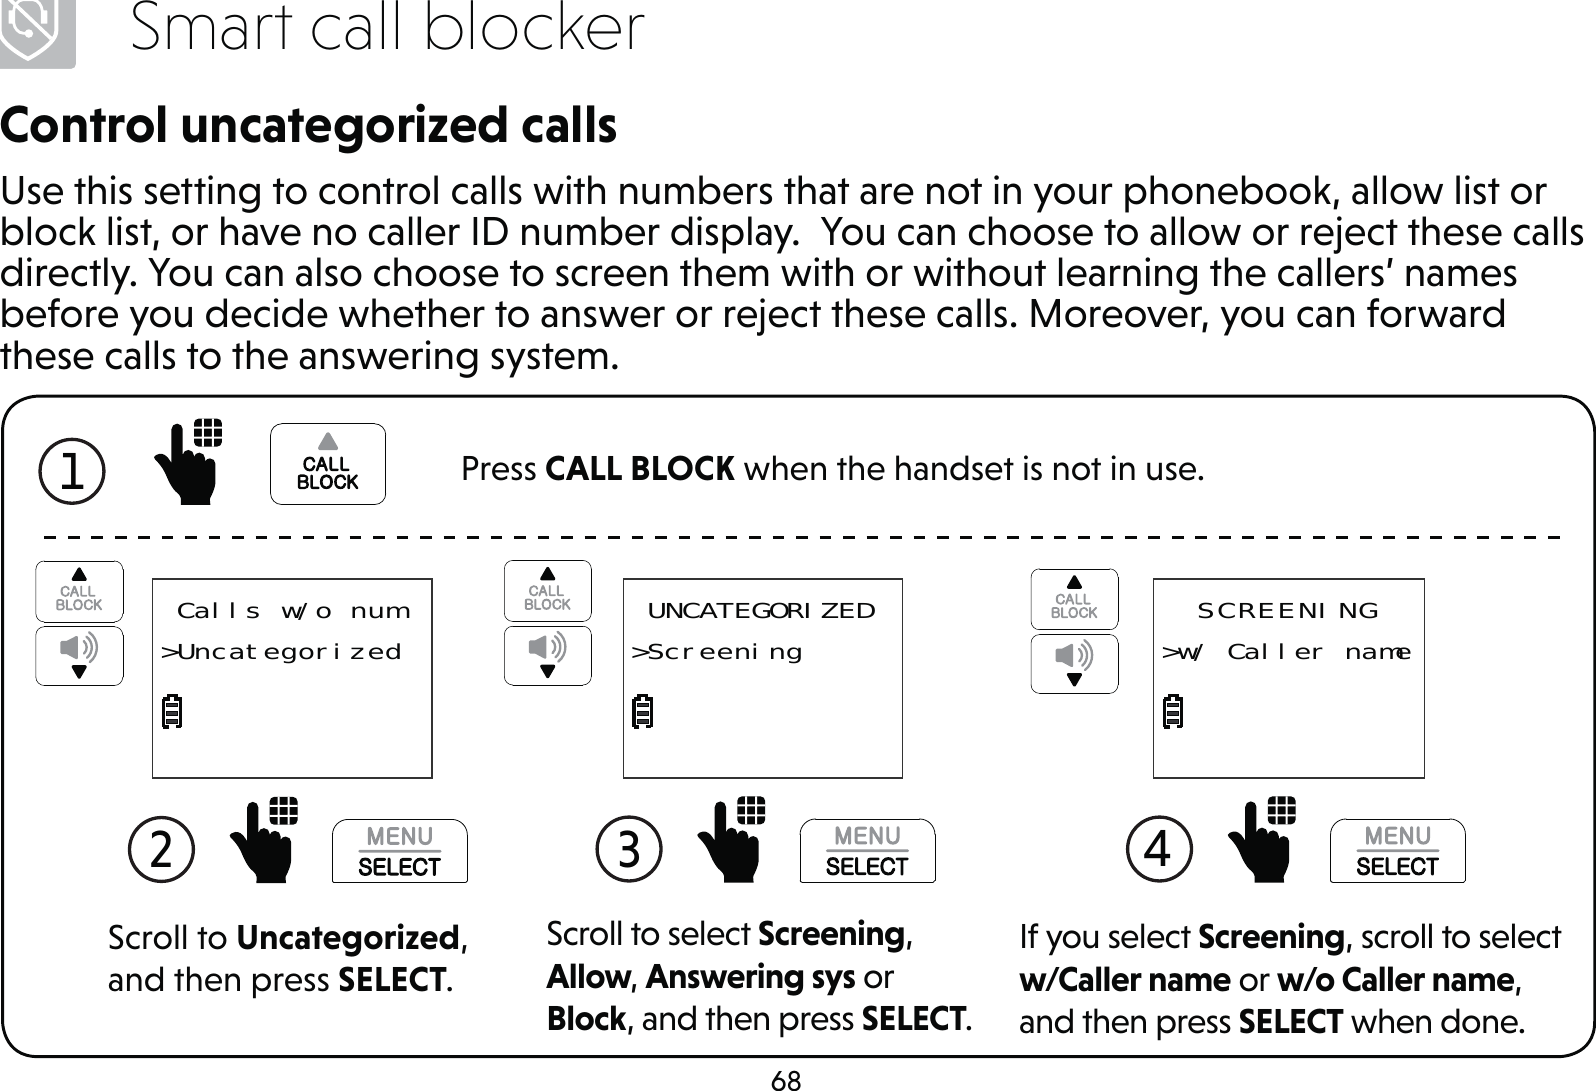 68Smart call blockerControl uncategorized callsUse this setting to control calls with numbers that are not in your phonebook, allow list or block list, or have no caller ID number display.  You can choose to allow or reject these calls directly. You can also choose to screen them with or without learning the callers’ names before you decide whether to answer or reject these calls. Moreover, you can forward these calls to the answering system.Scroll to Uncategorized, and then press SELECT.2  Calls w/o num&gt;UncategorizedScroll to select Screening, Allow, Answering sys or Block, and then press SELECT.3  UNCATEGORIZED&gt;ScreeningIf you select Screening, scroll to select w/Caller name or w/o Caller name, and then press SELECT when done.4 SCREENING&gt;w/ Caller name1  Press CALL BLOCK when the handset is not in use.